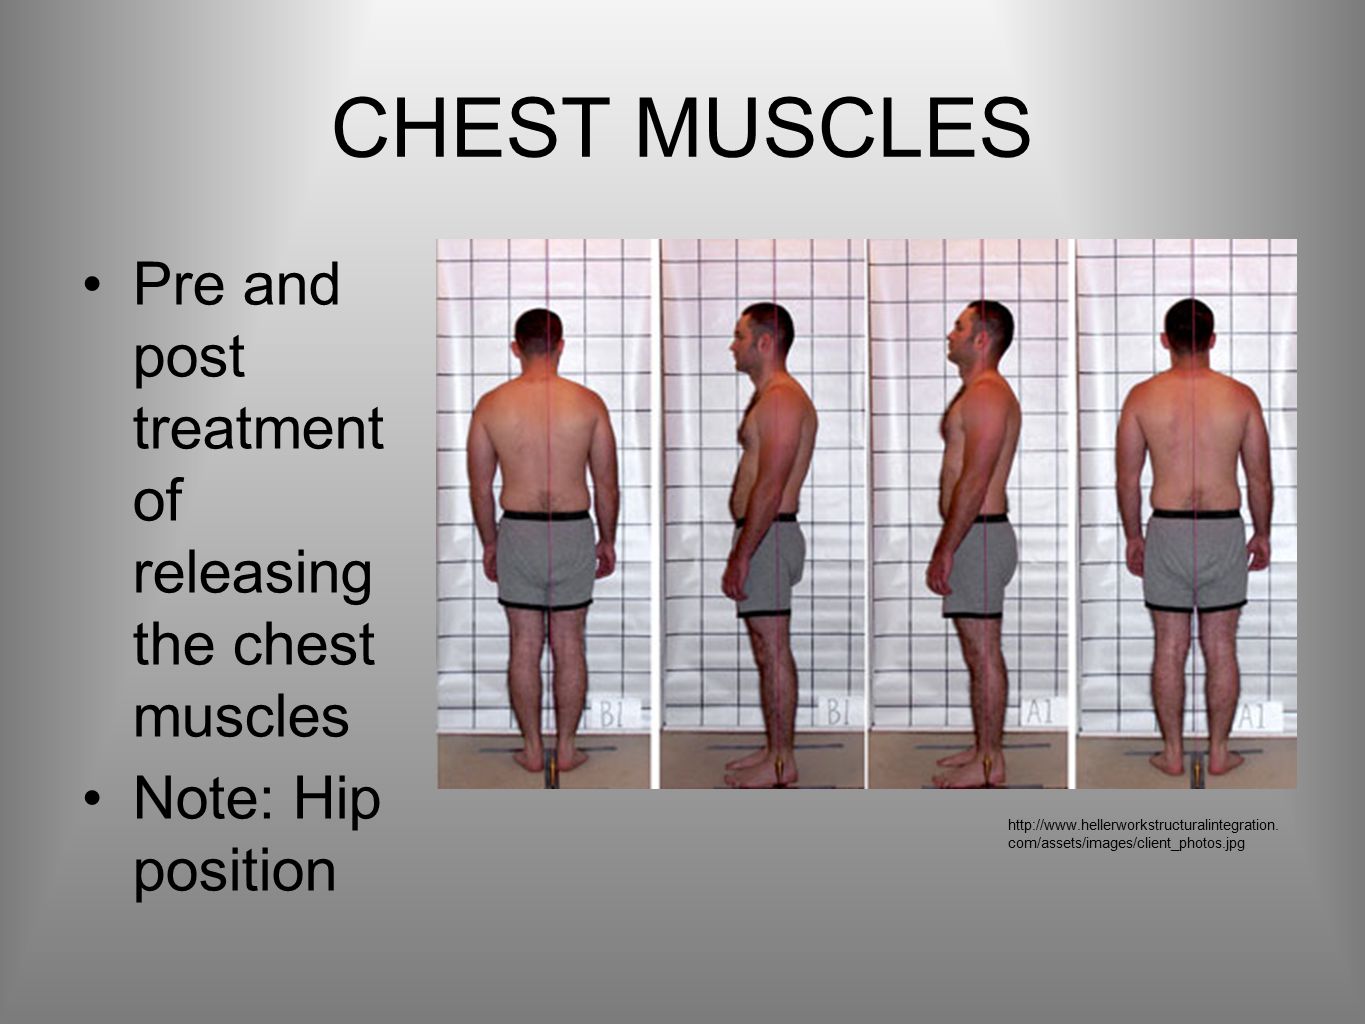 CHEST MUSCLES Pre and post treatment of releasing the chest muscles Note: Hip position